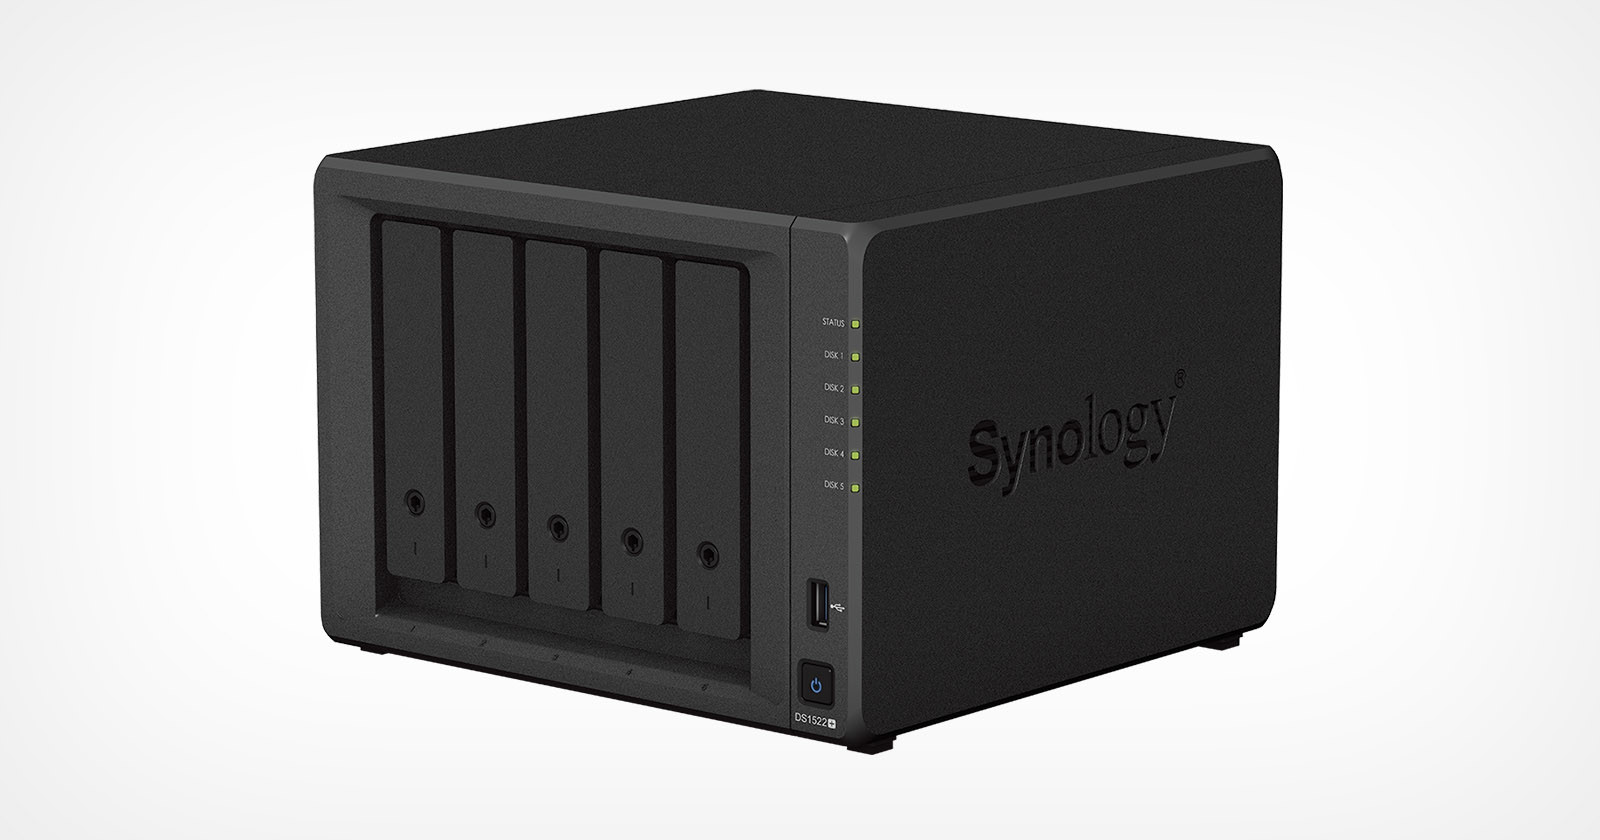  synology ds1522 compact desktop 5-bay nas 